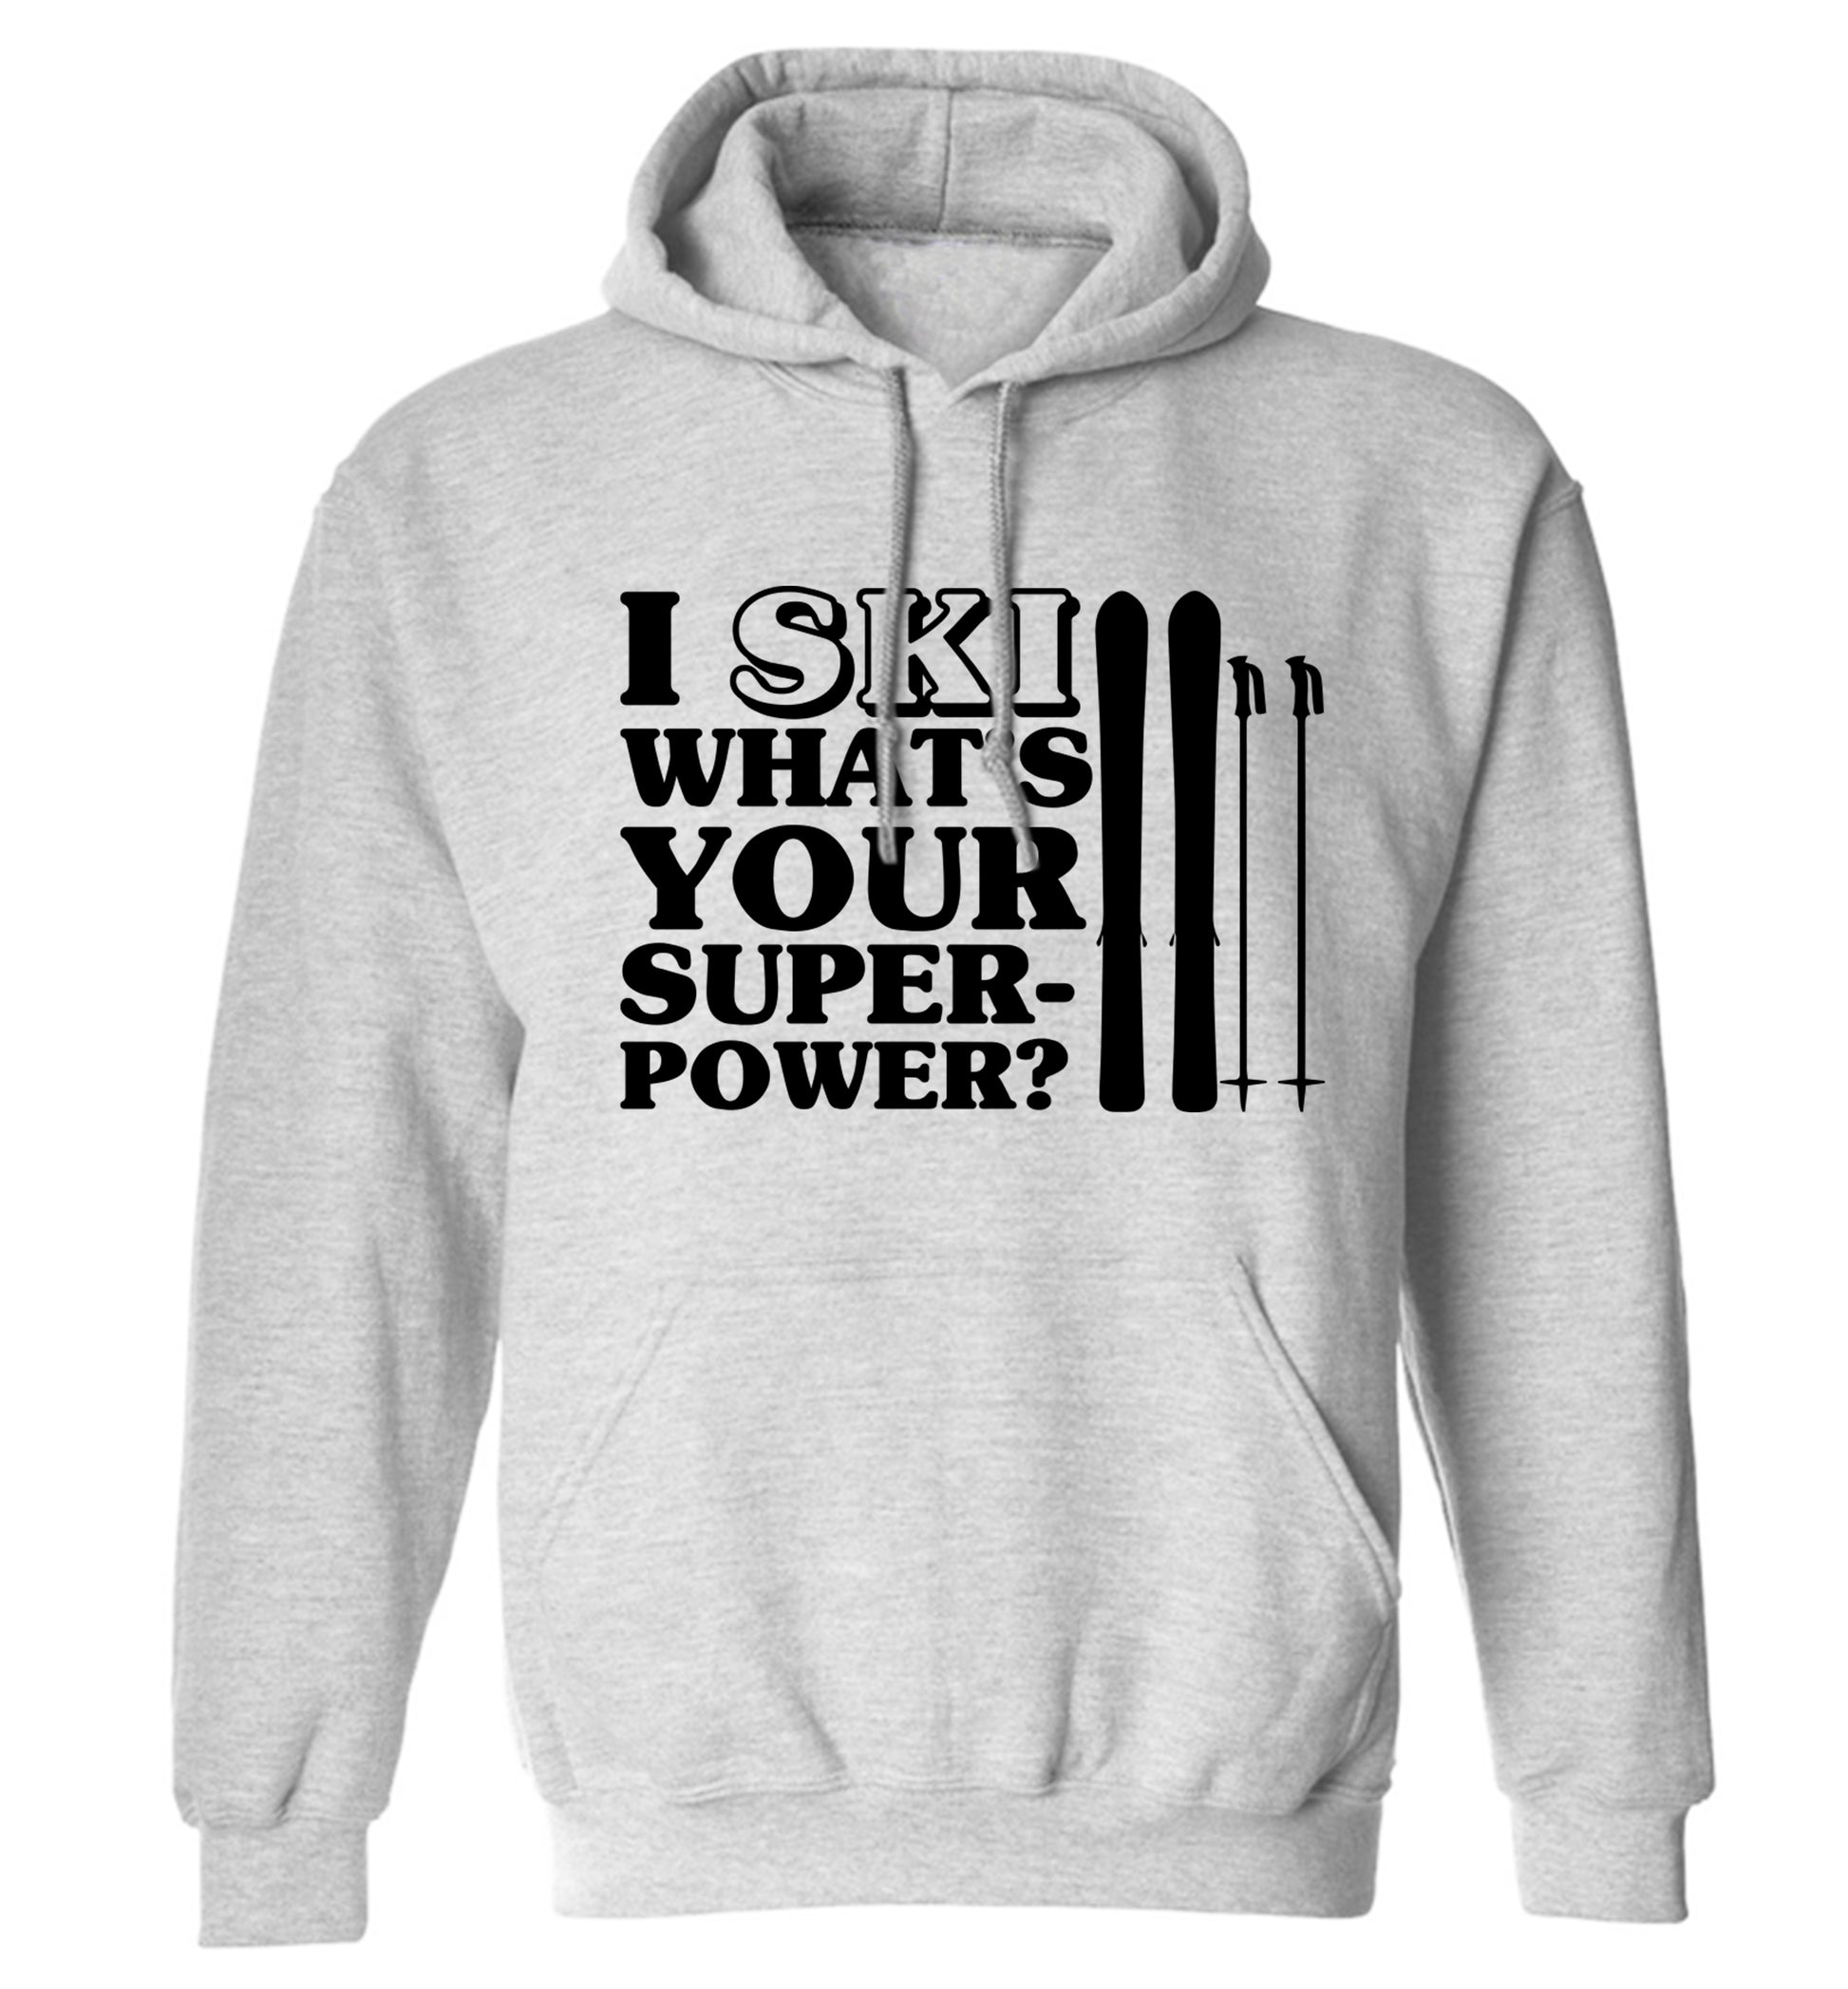 I ski what's your superpower? adults unisexgrey hoodie 2XL